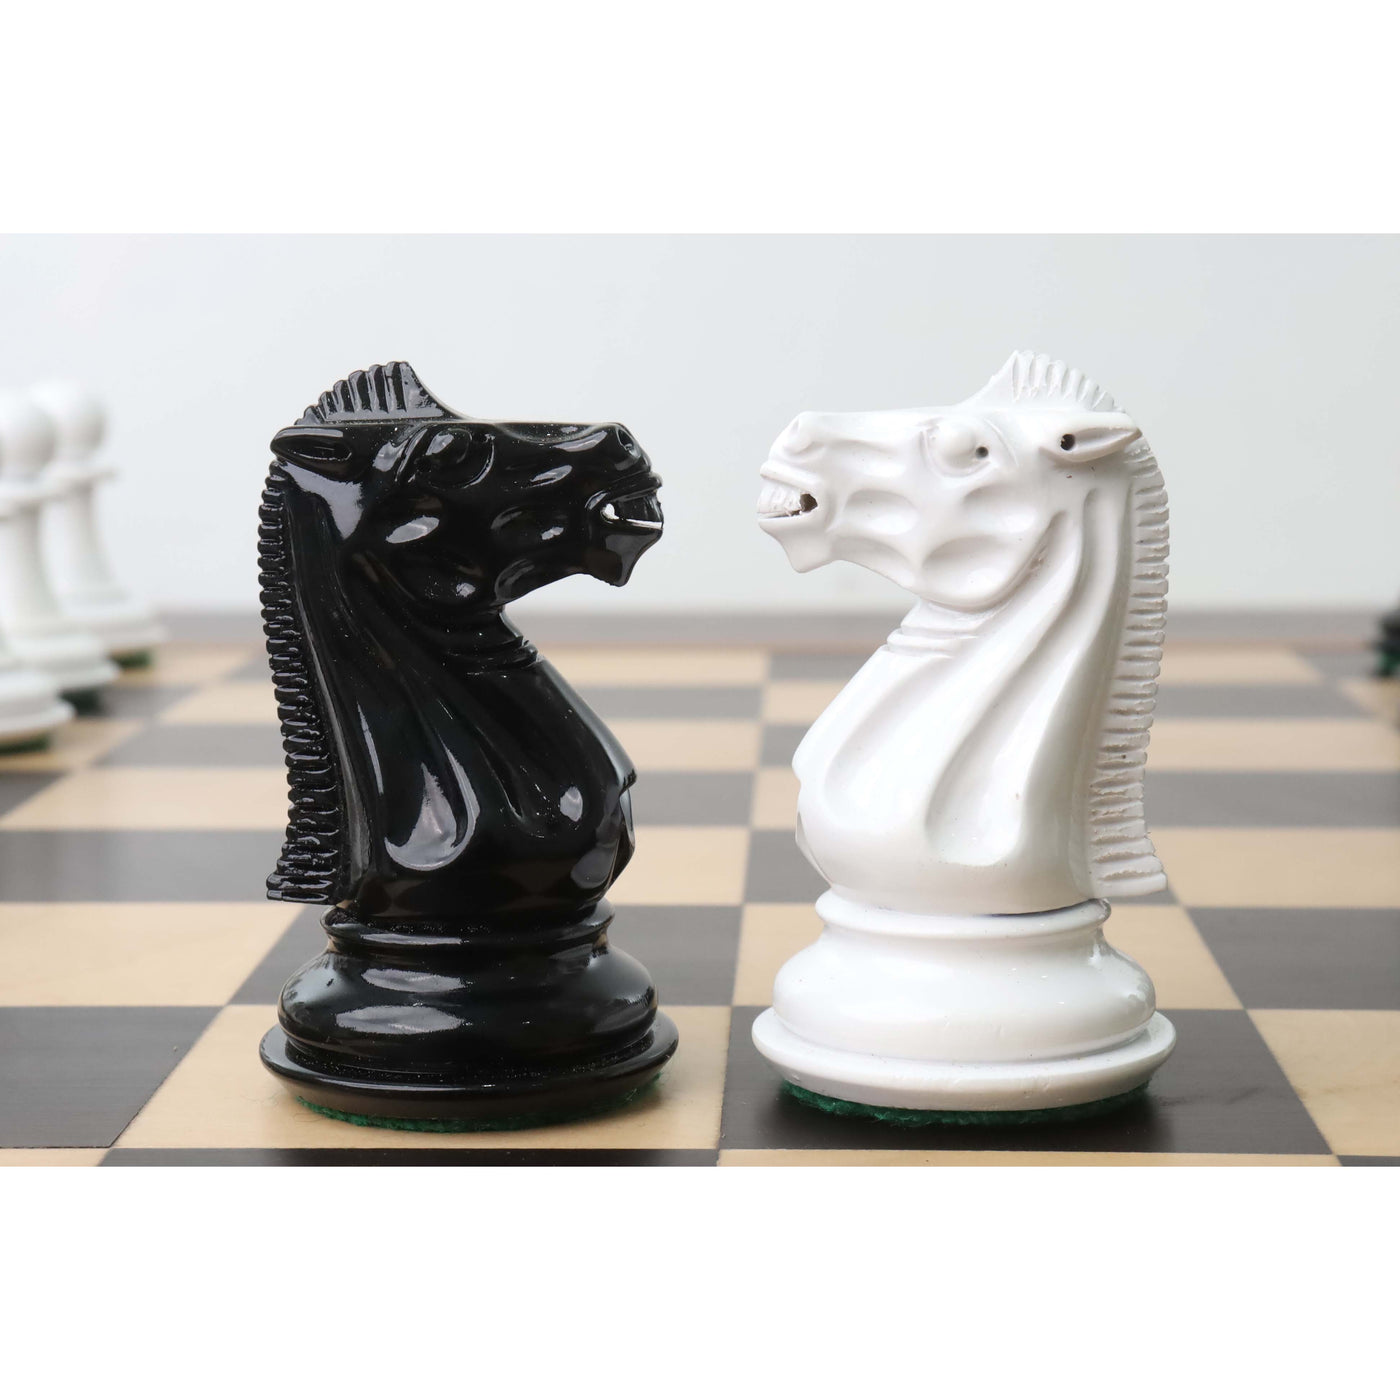 1940s' Soviet Reproduced Chess Pieces Only Set - Black and White Lacquer Boxwood